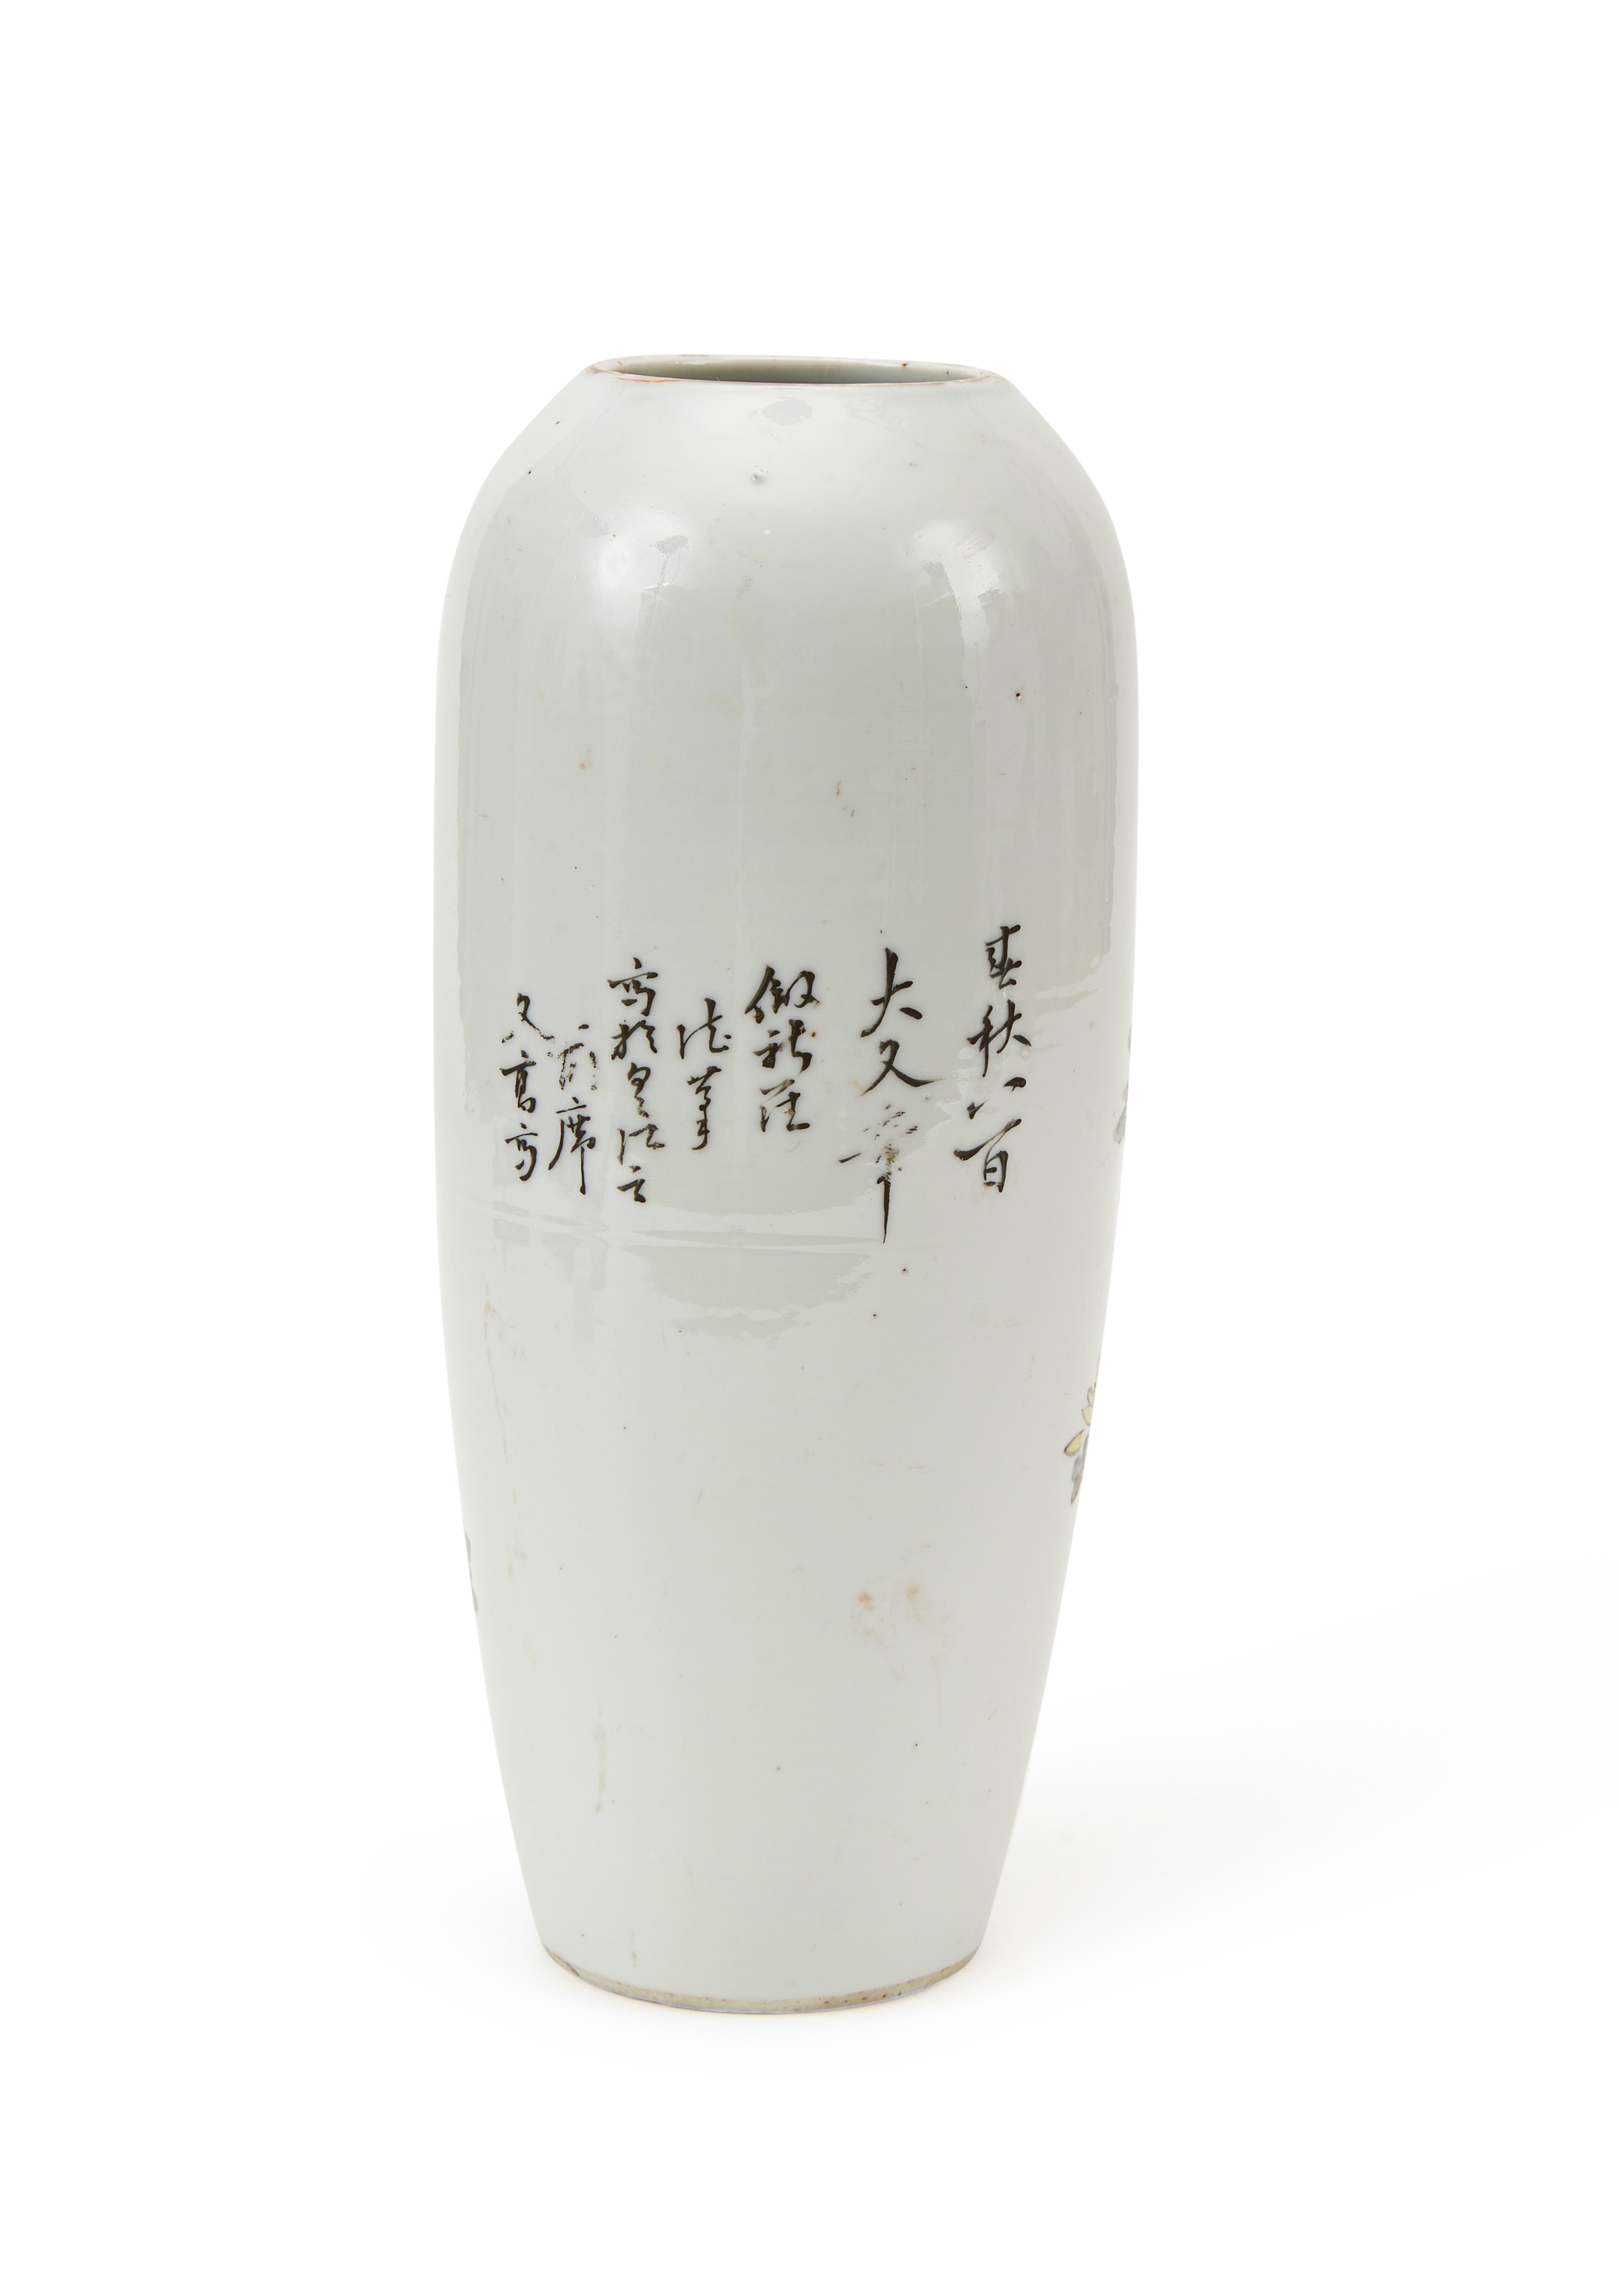 AN INSCRIBED FLOWERS & BIRD VASE, REPUBLIC PERIOD - Image 2 of 5